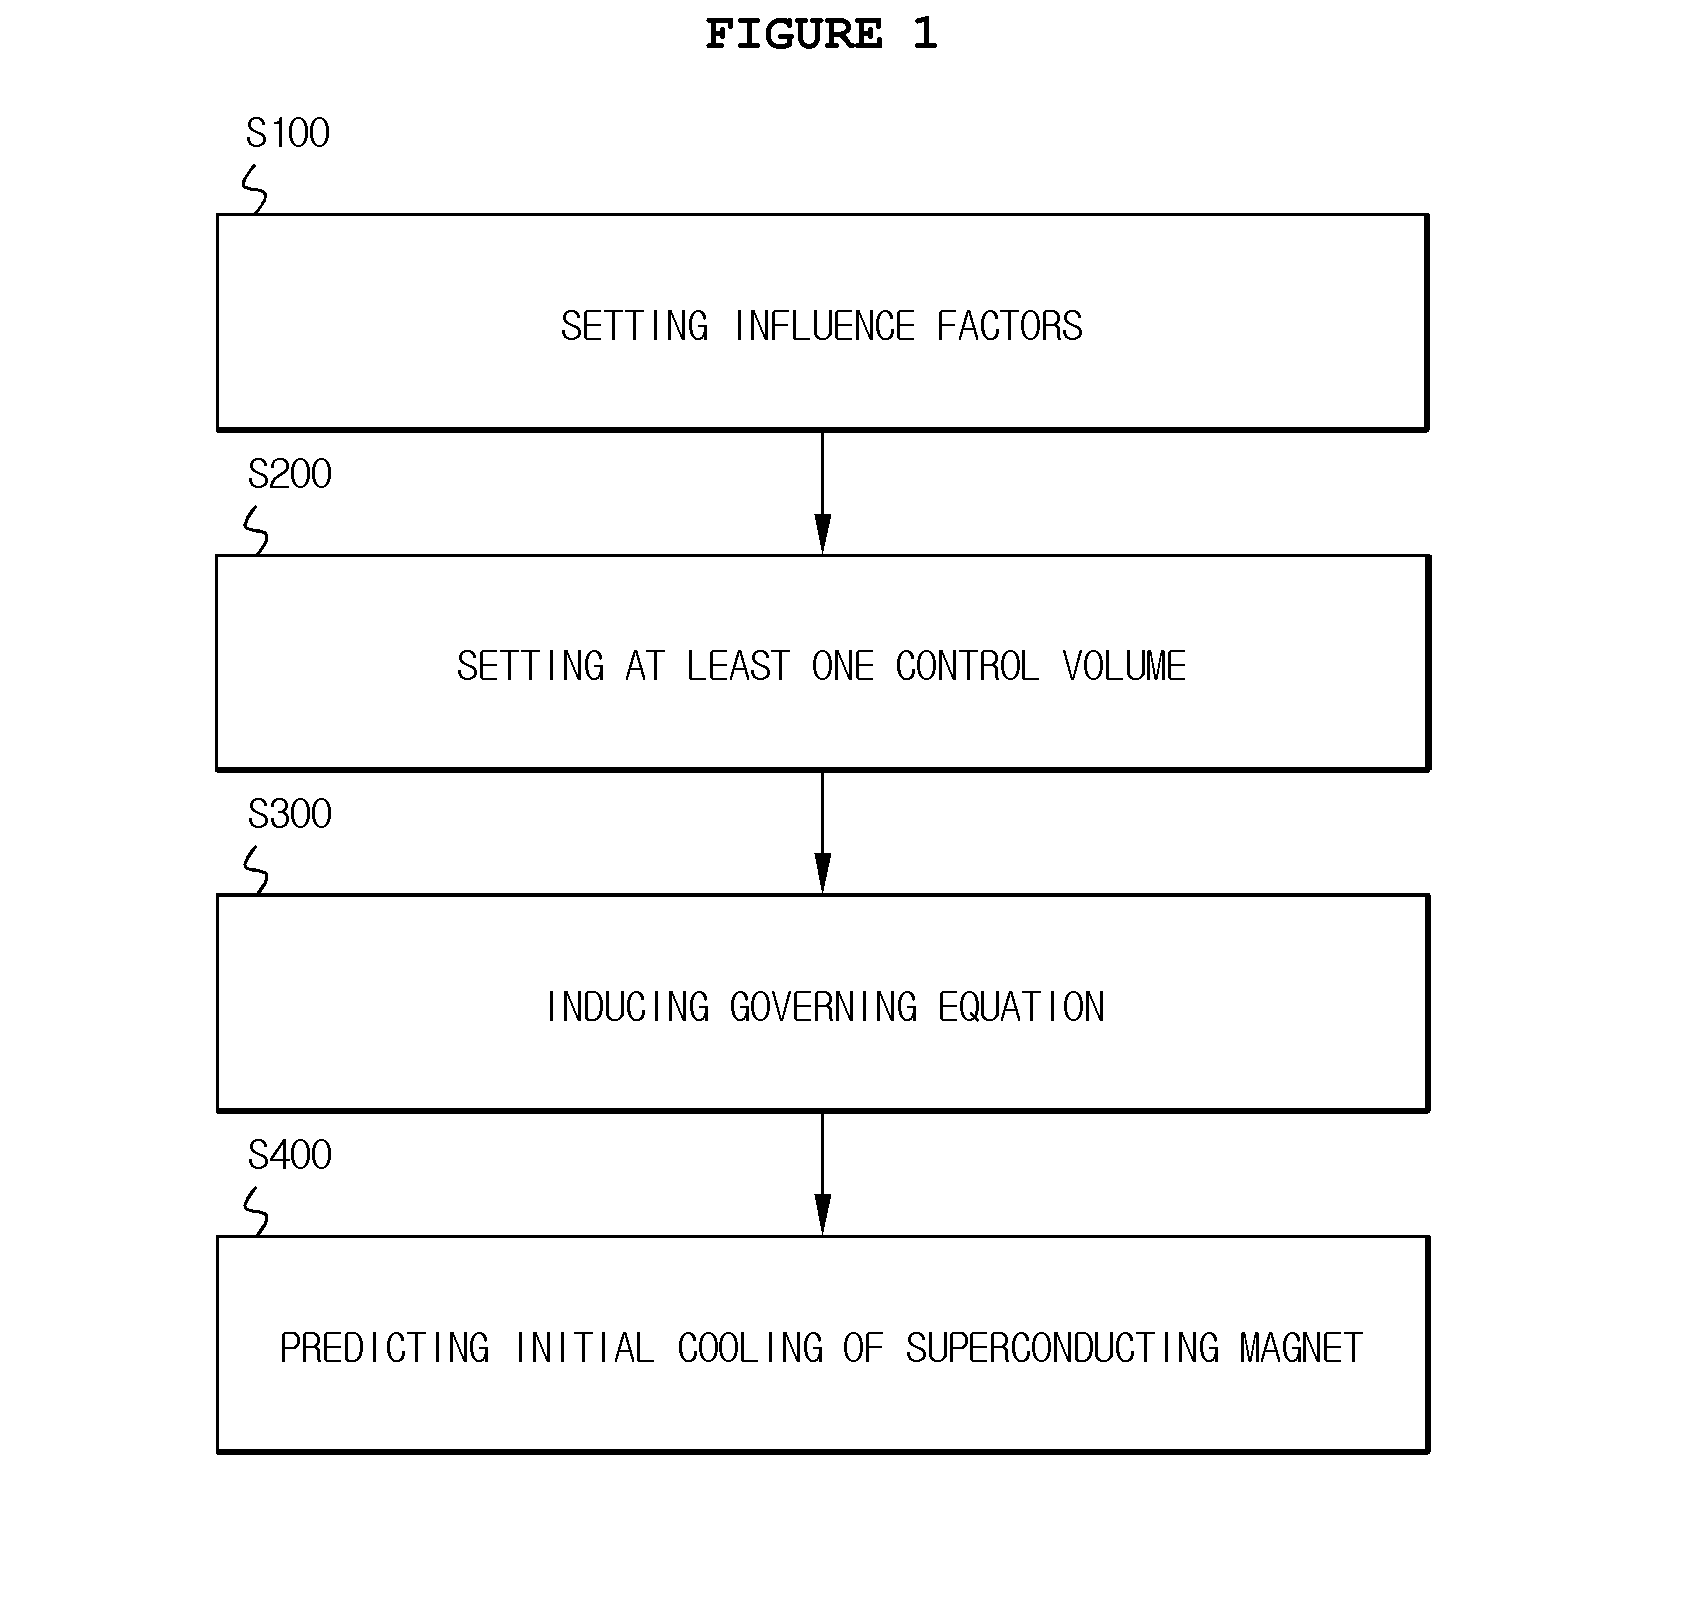 System and method of predicting initial cooling of superconducting magnet